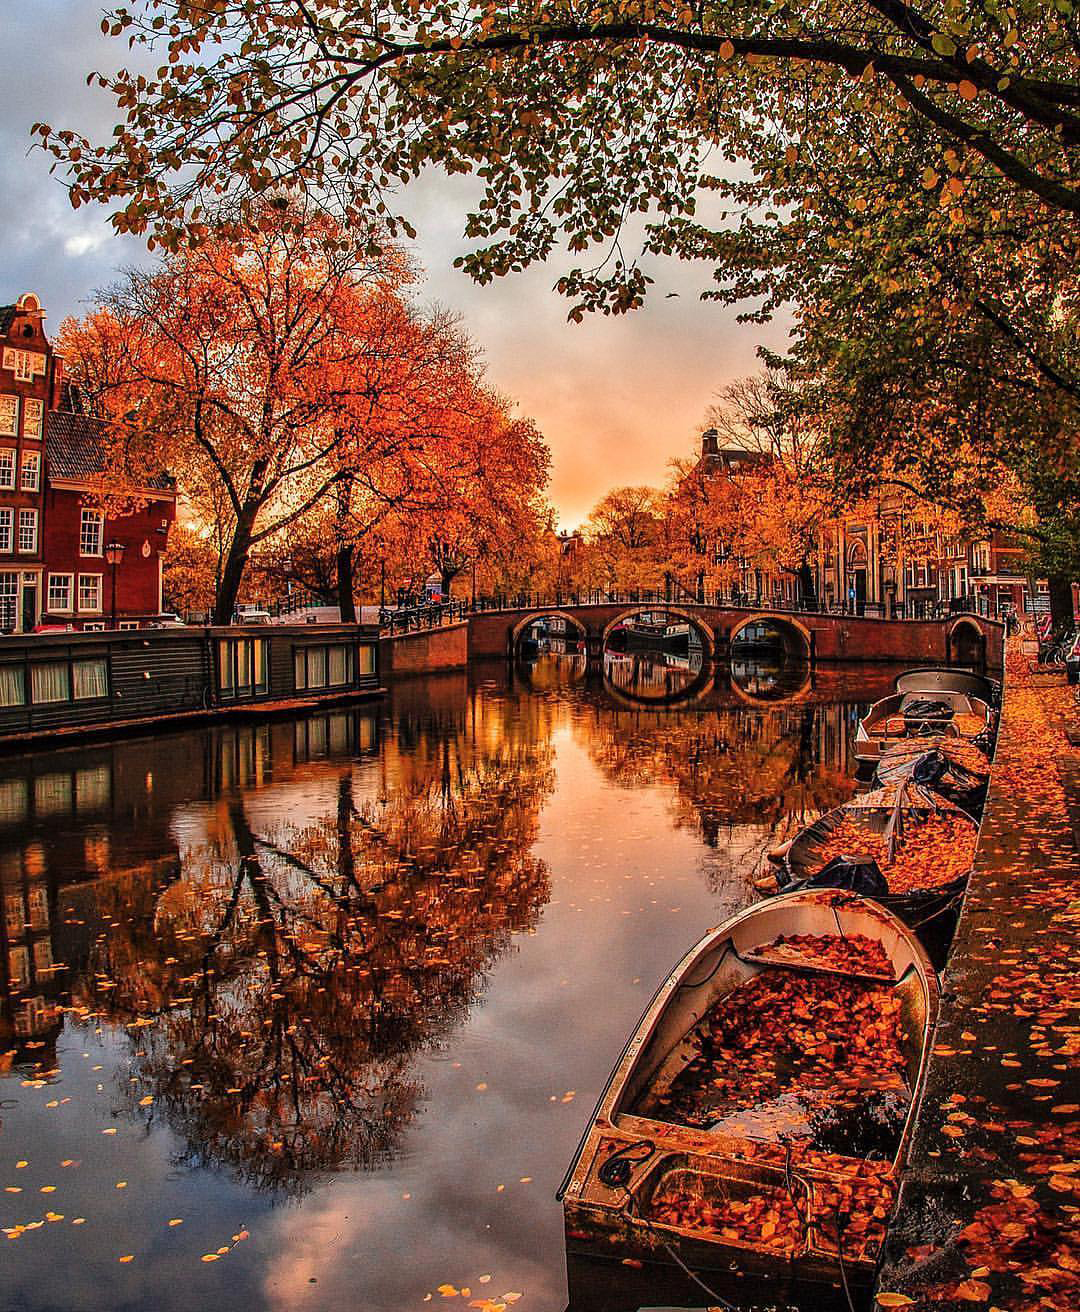 Amsterdam in the Fall | Karinal Melon on Instagram